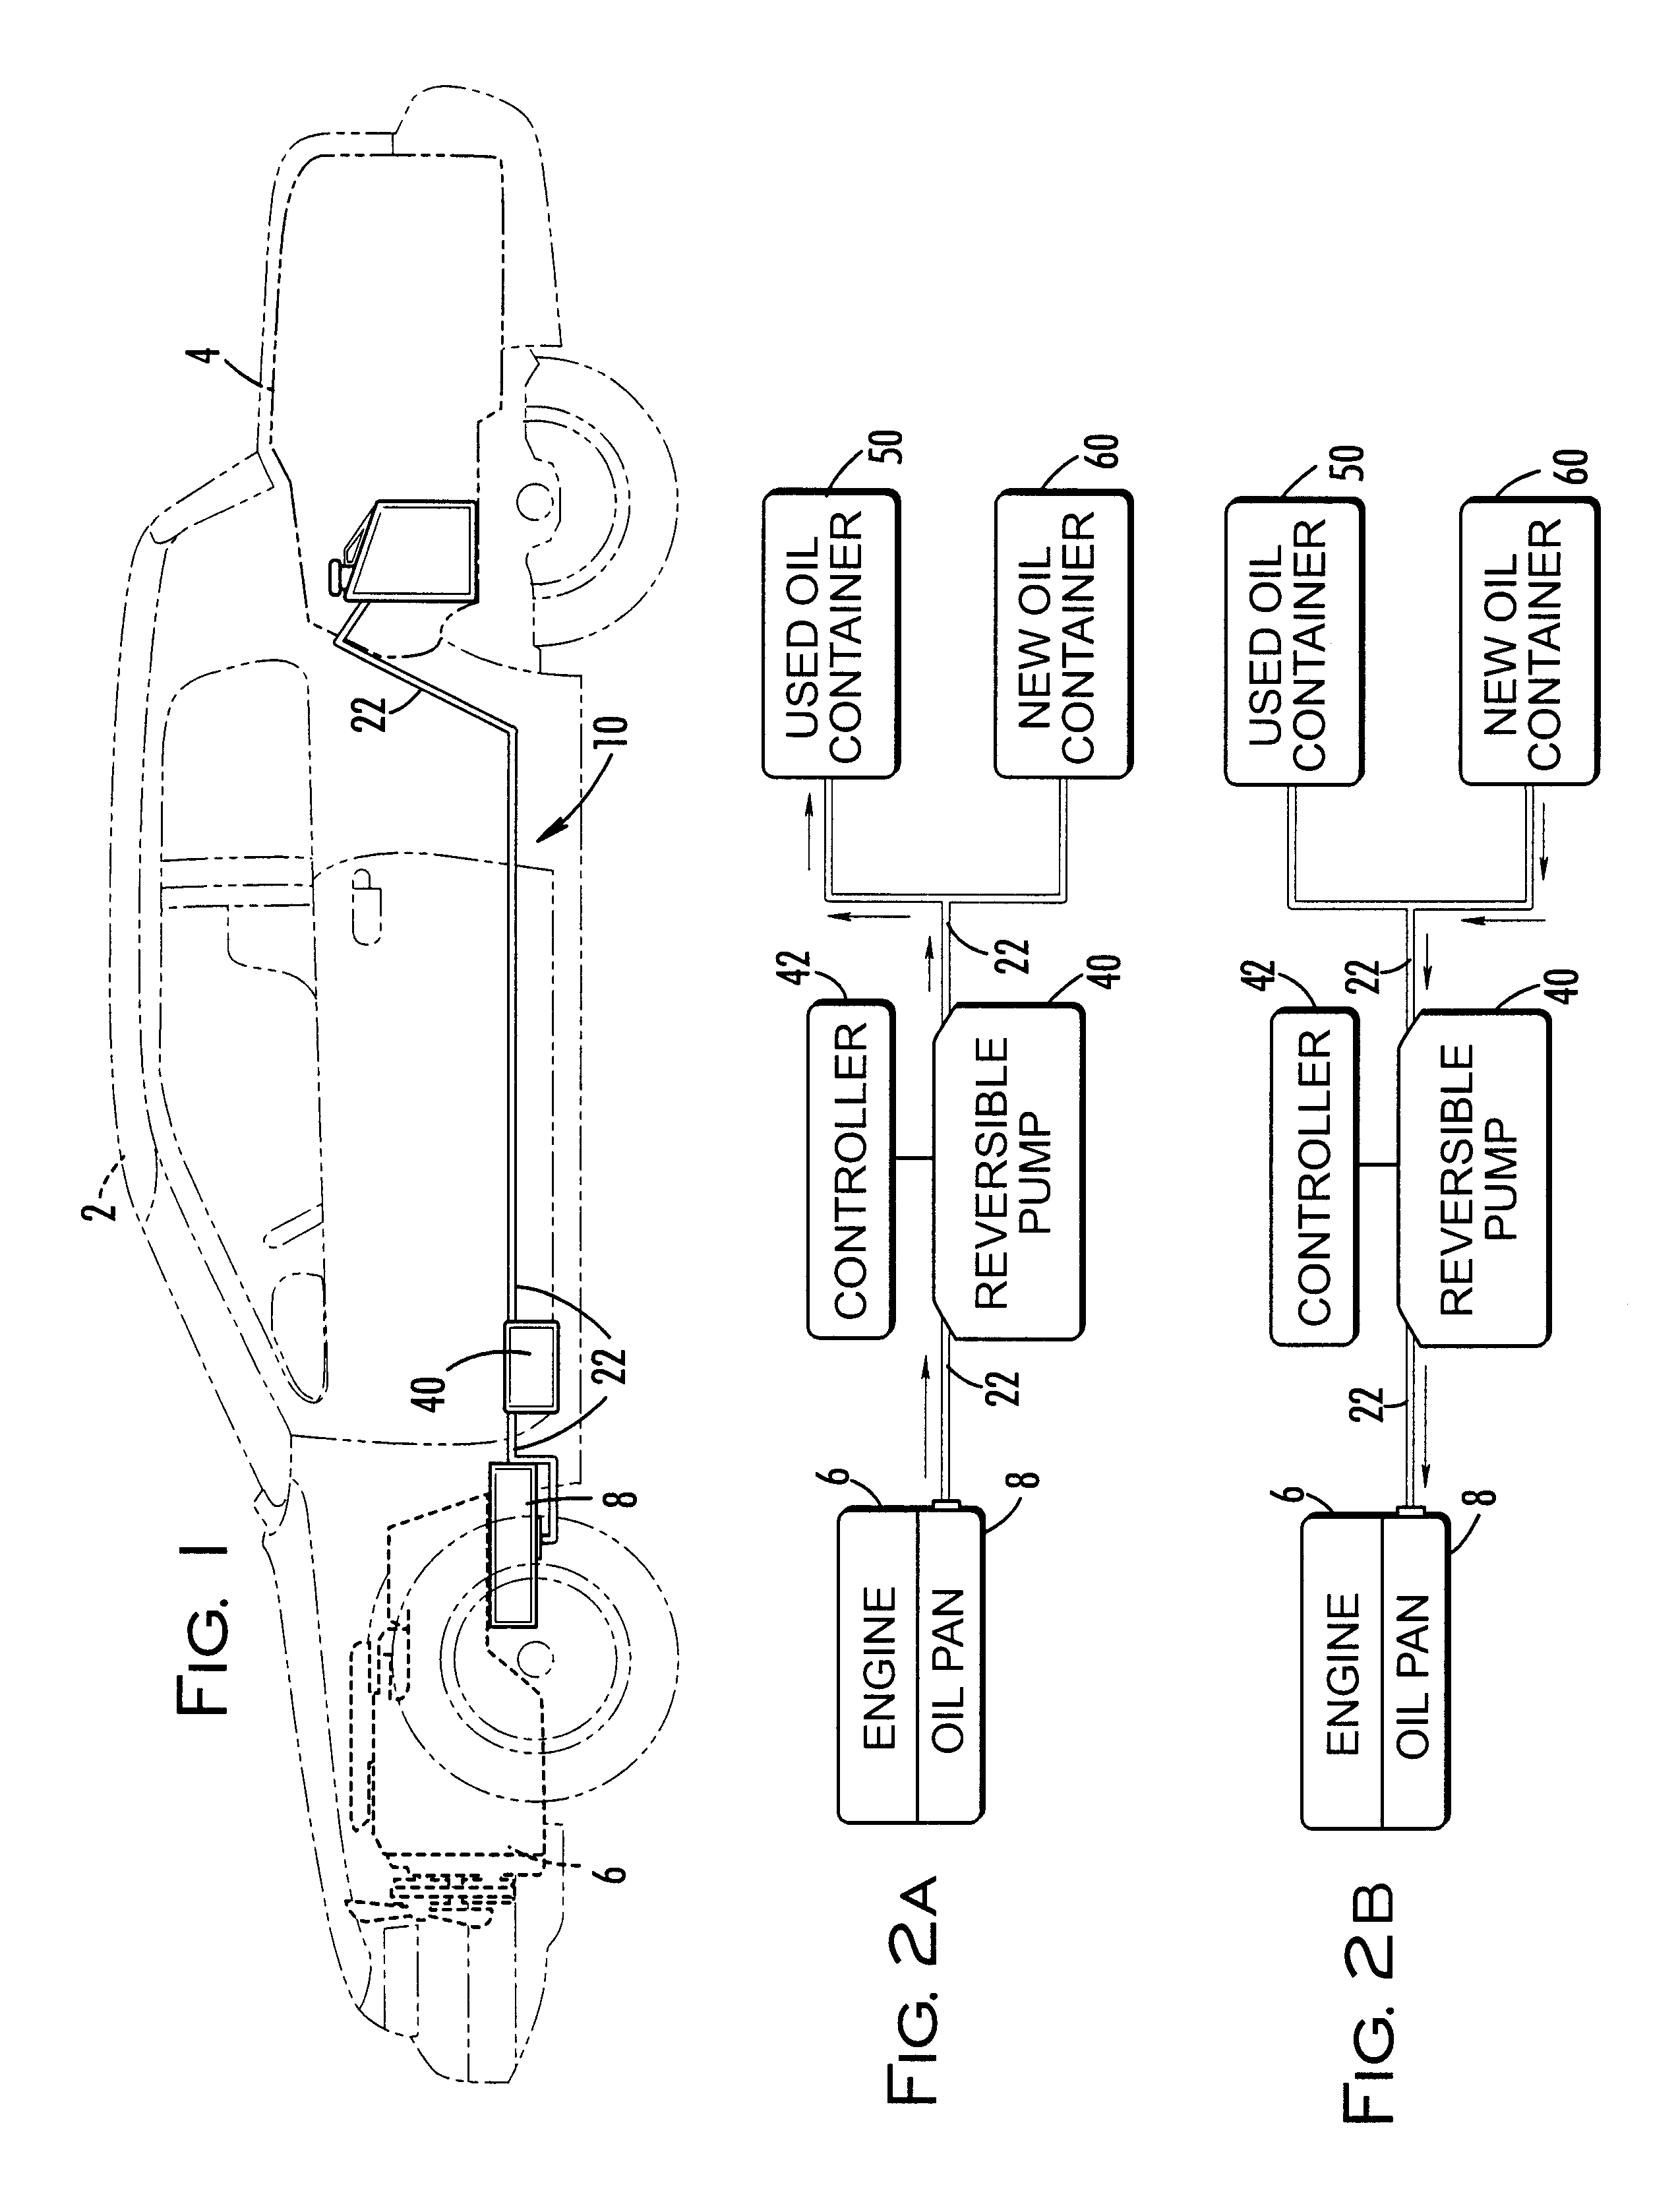 Automated oil changing system